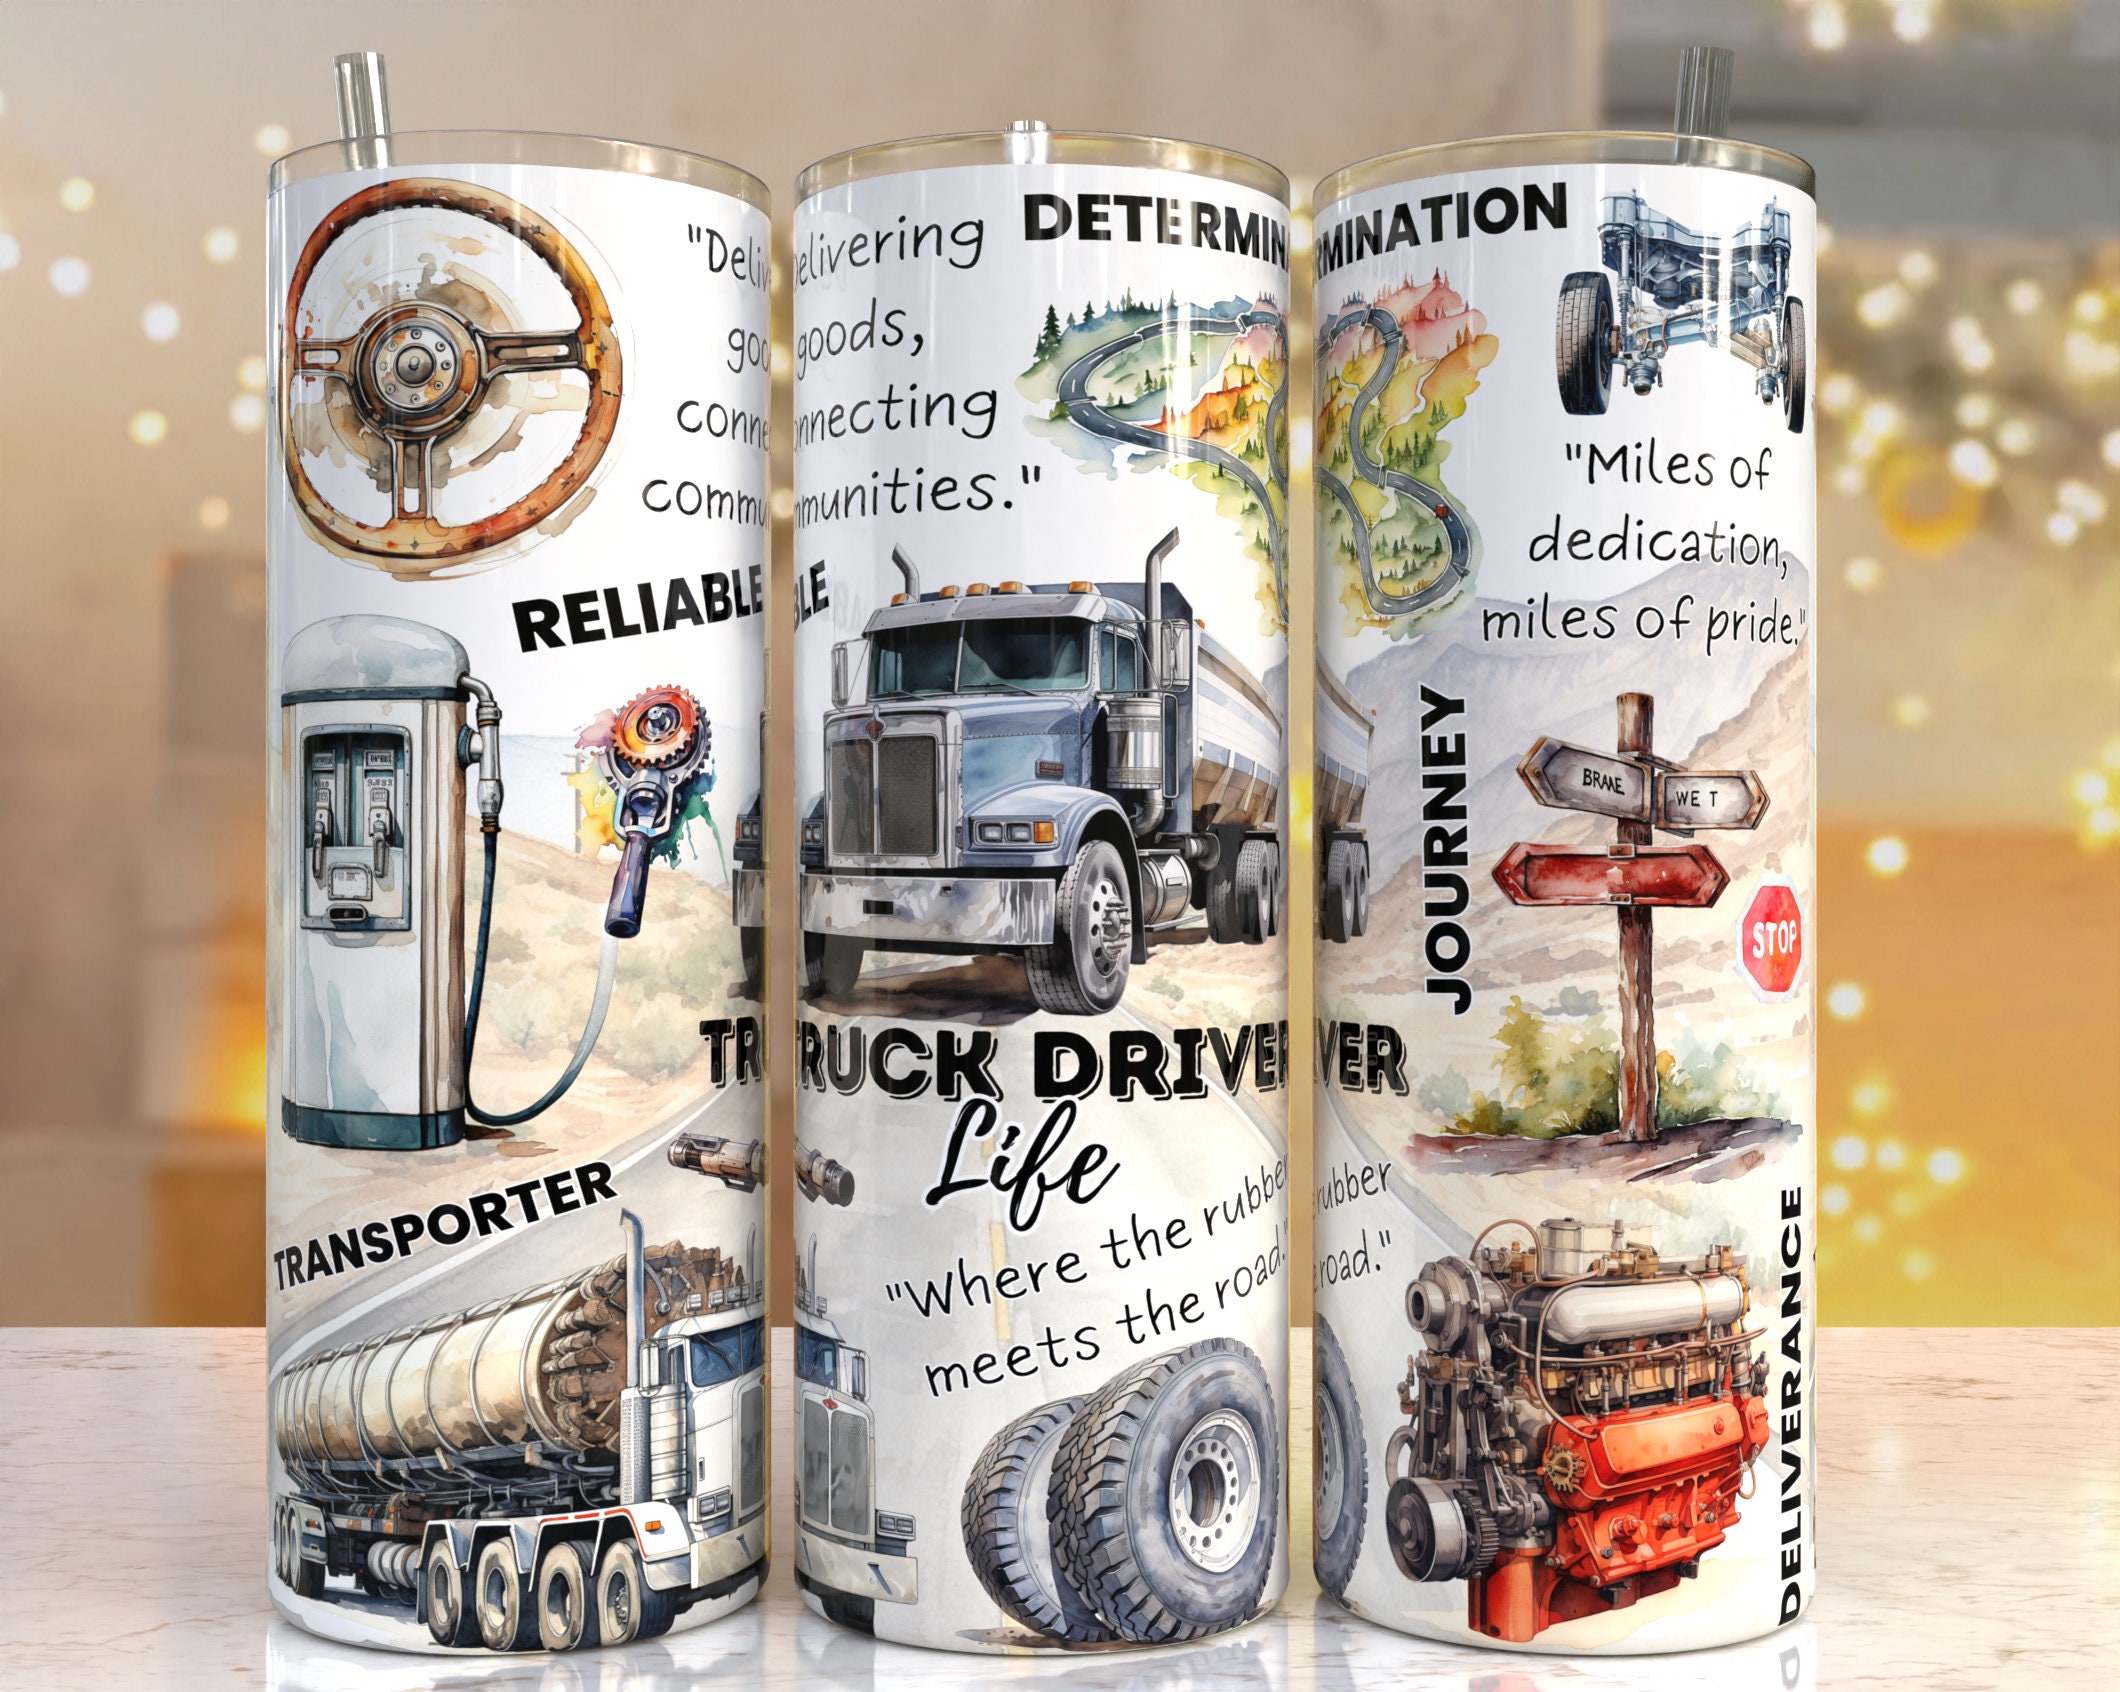 Trucking Legend Since 1971 Birthday Gifts For Truck Drivers Art Print by  Above the Village Design